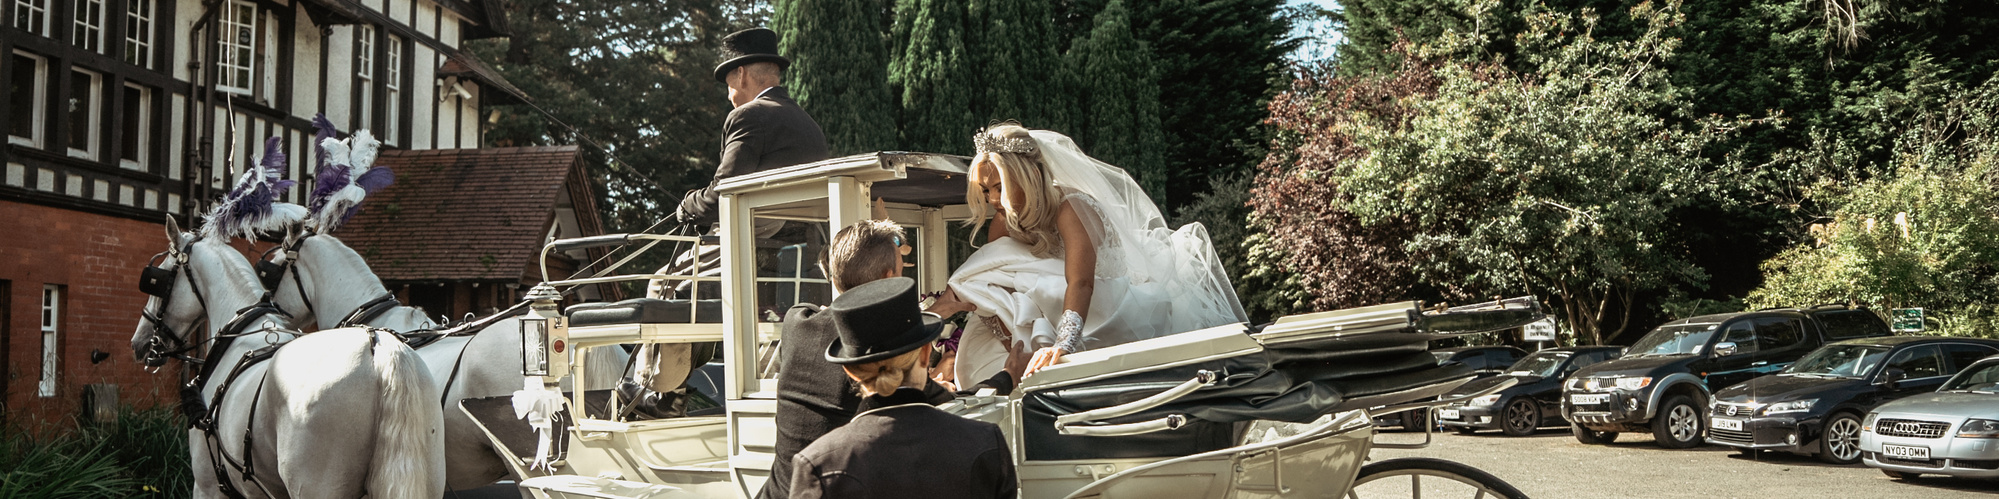 bride getting out of a carriage with horses on wedding day before ceremony